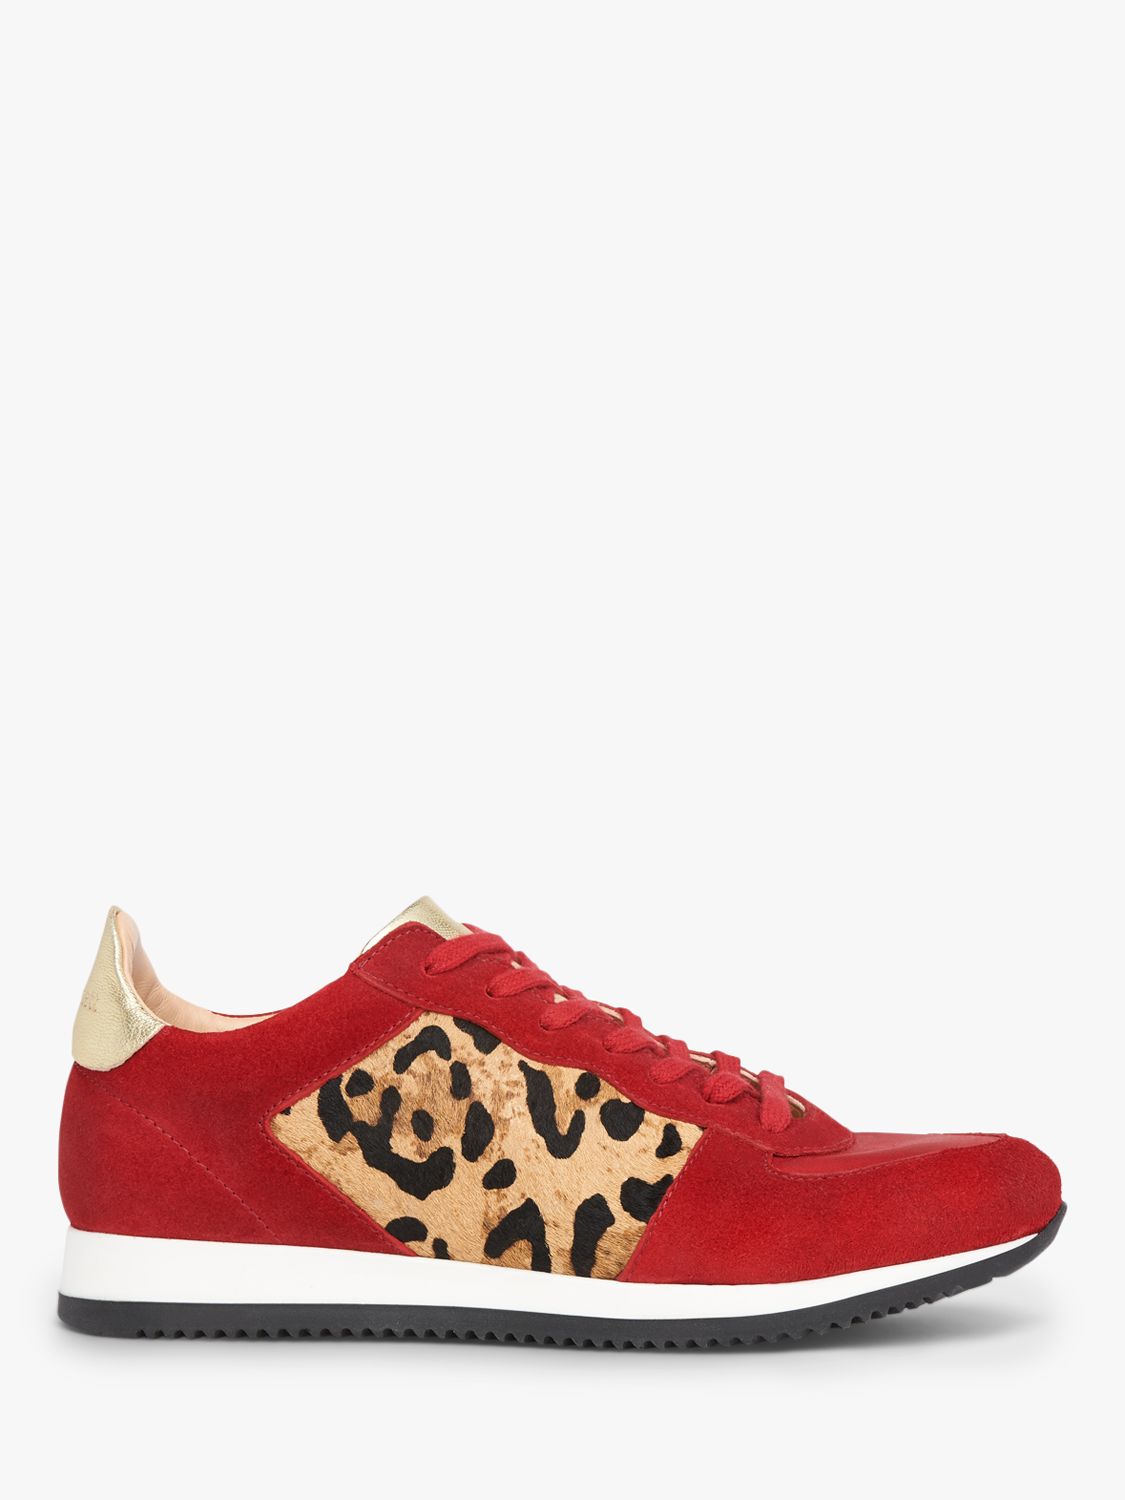 L.K.Bennett Ricky Suede Leopard Print Trainers, Red